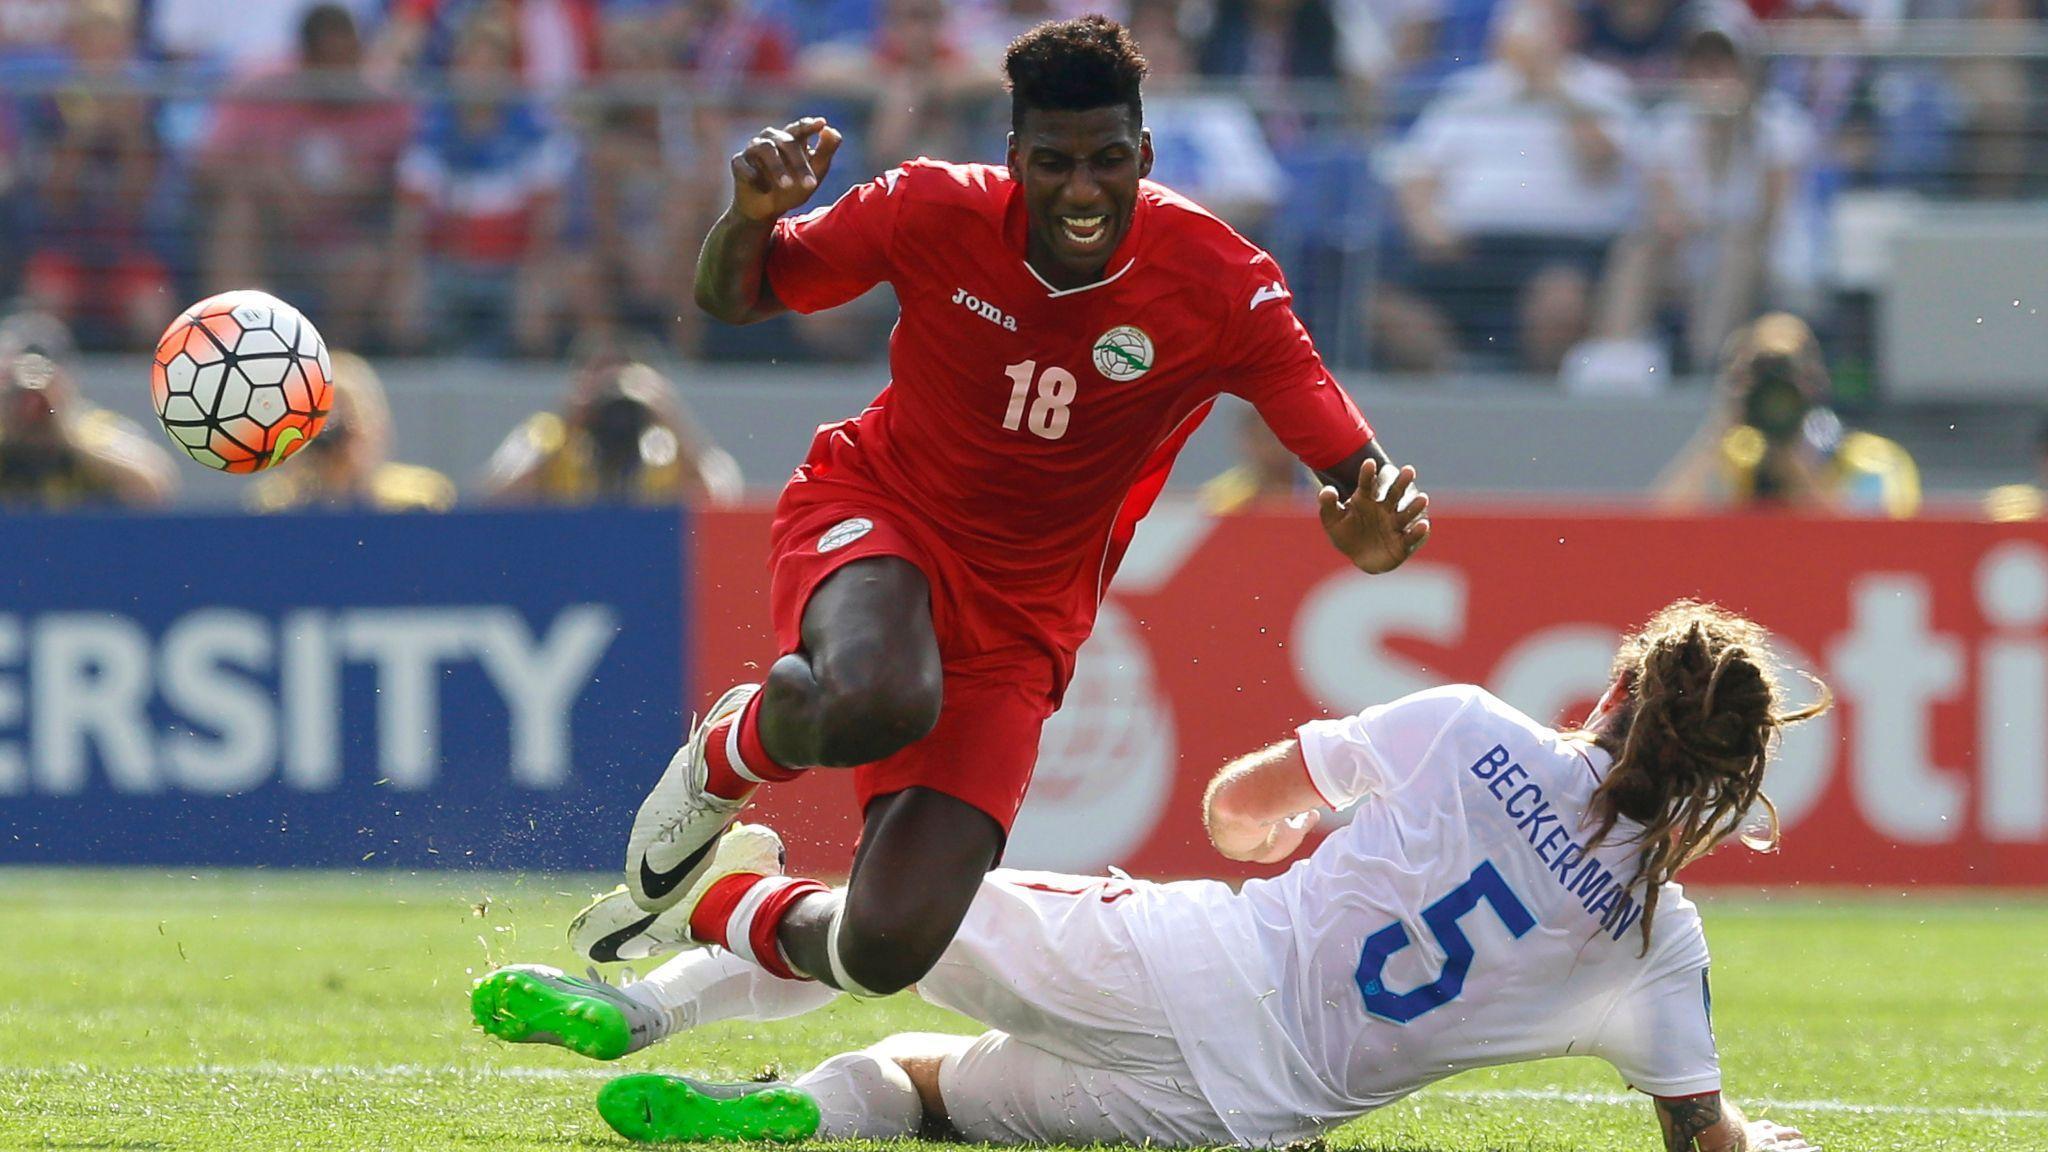 Diplomatic Relations: The USMNT and Cuba Play Soccer in a Changing